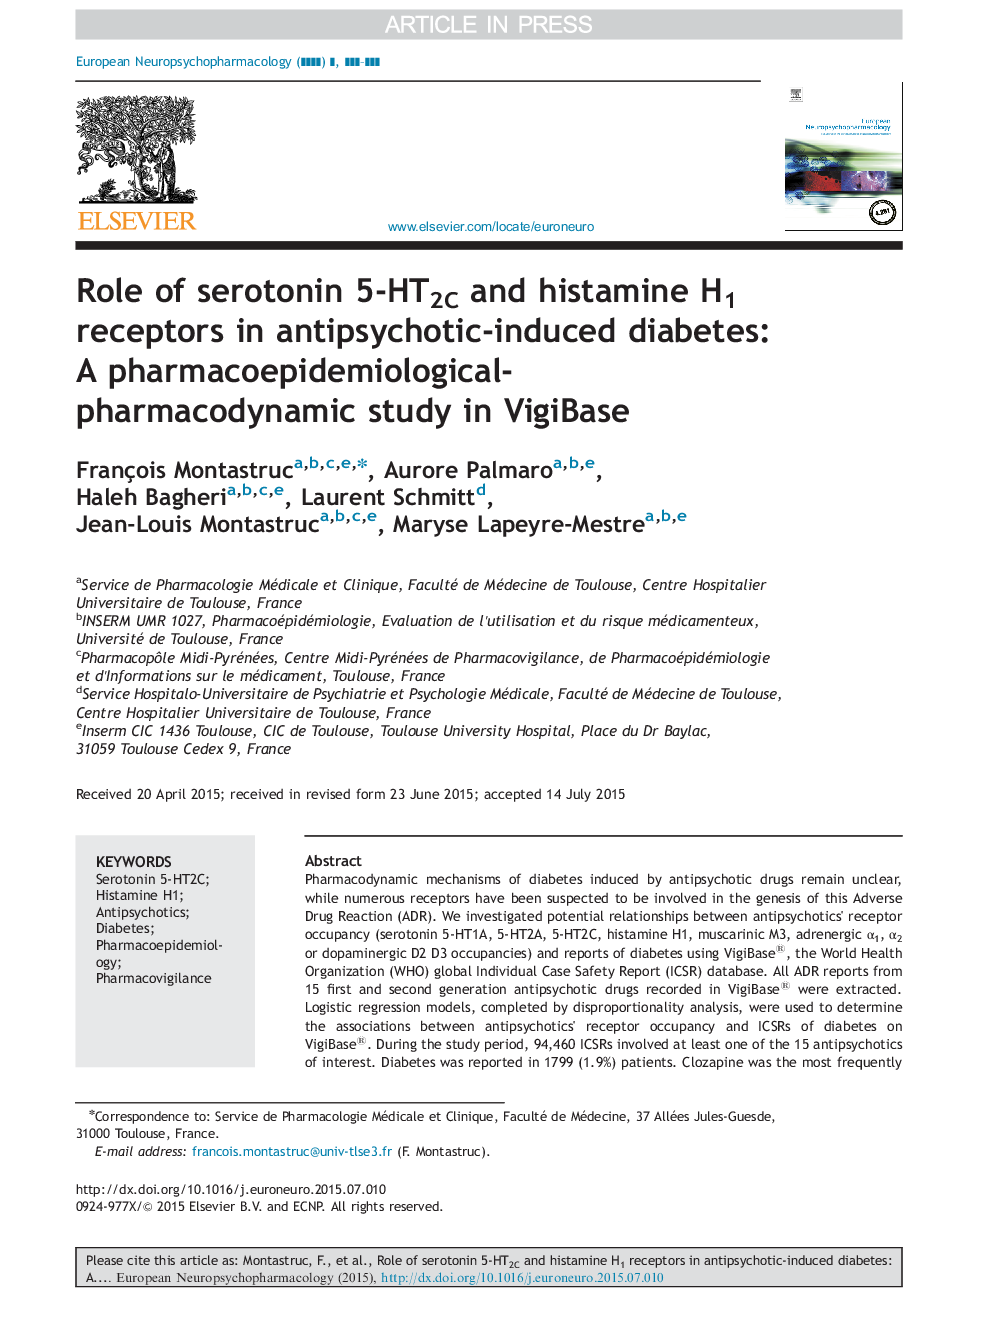 Role of serotonin 5-HT2C and histamine H1 receptors in antipsychotic-induced diabetes: A pharmacoepidemiological-pharmacodynamic study in VigiBase